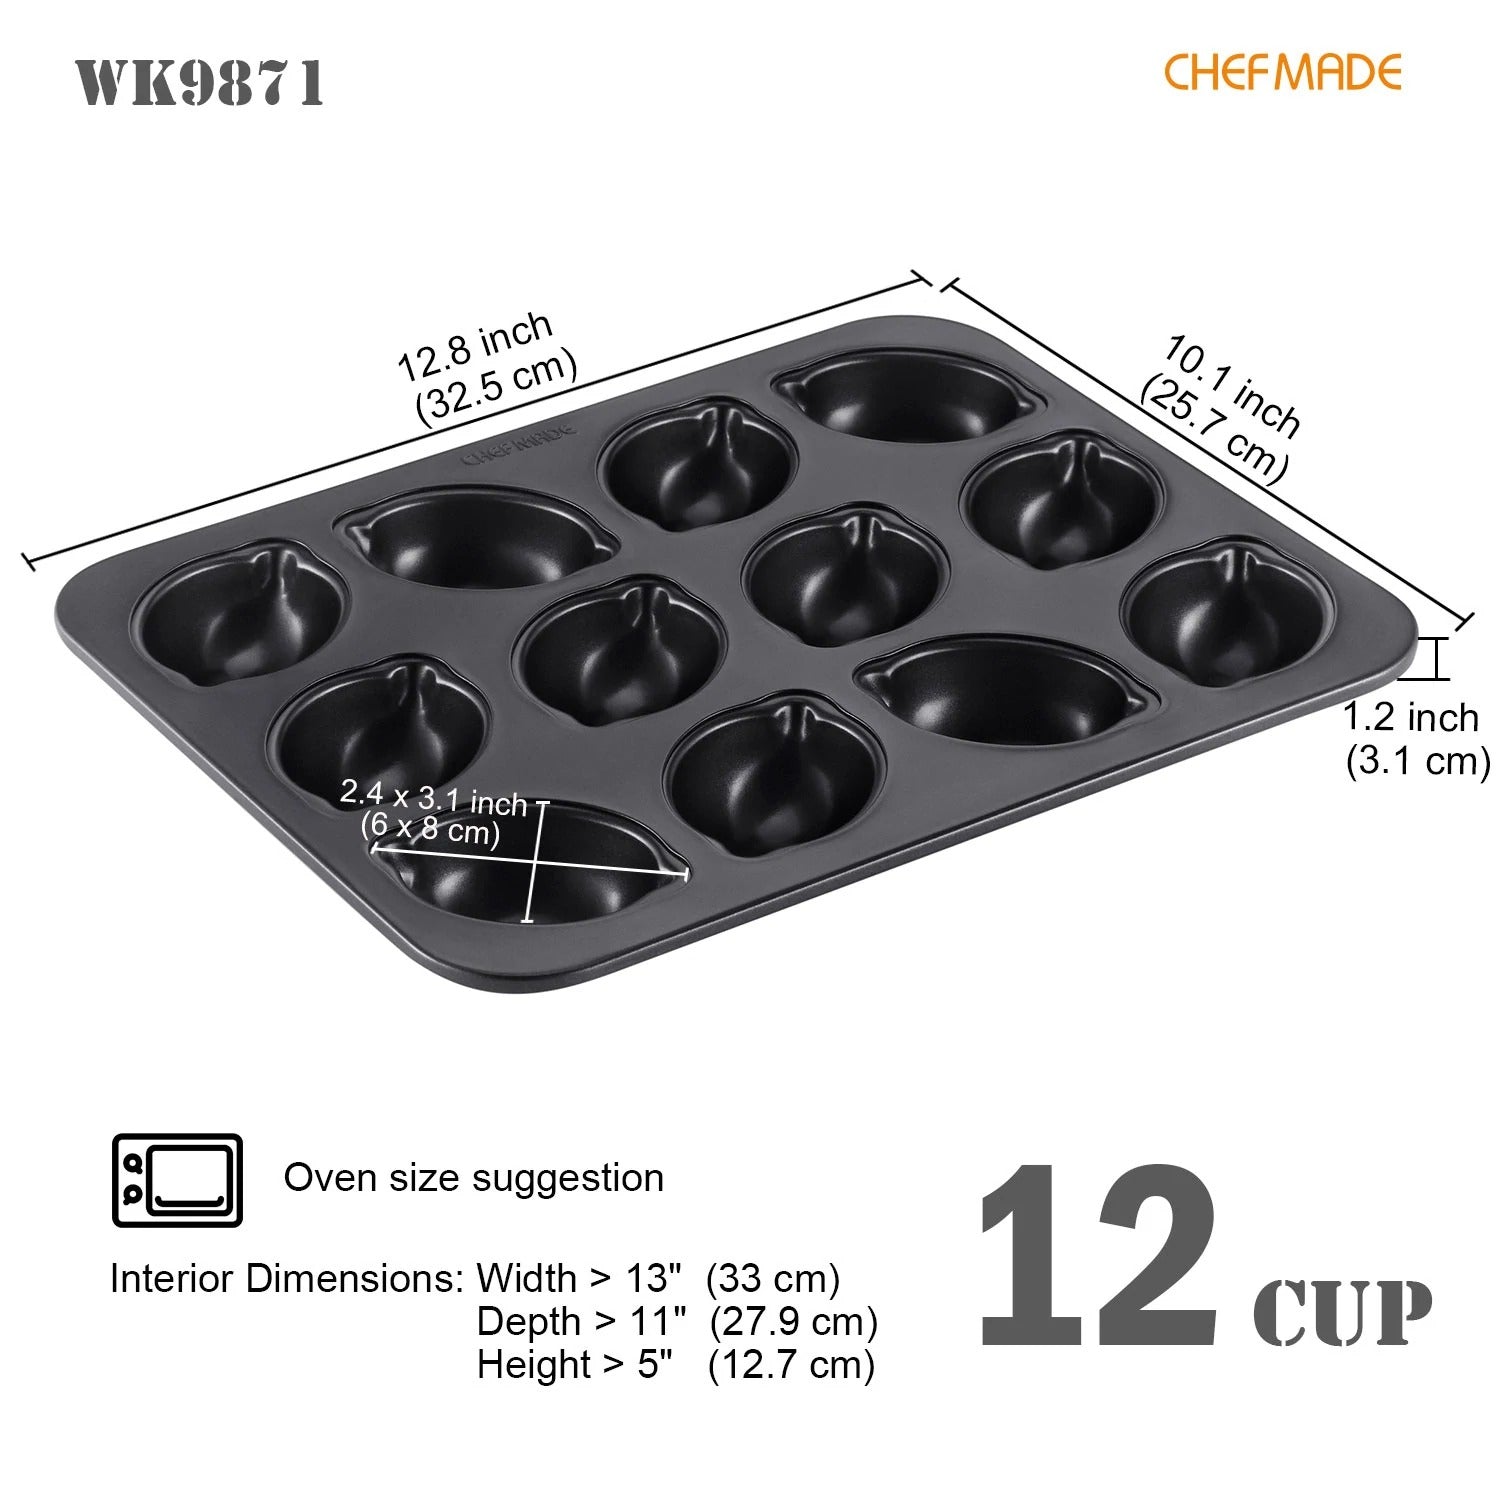 CHEFMADE 12 Cup Non-Stick Lemon Cake Mould (WK9871)